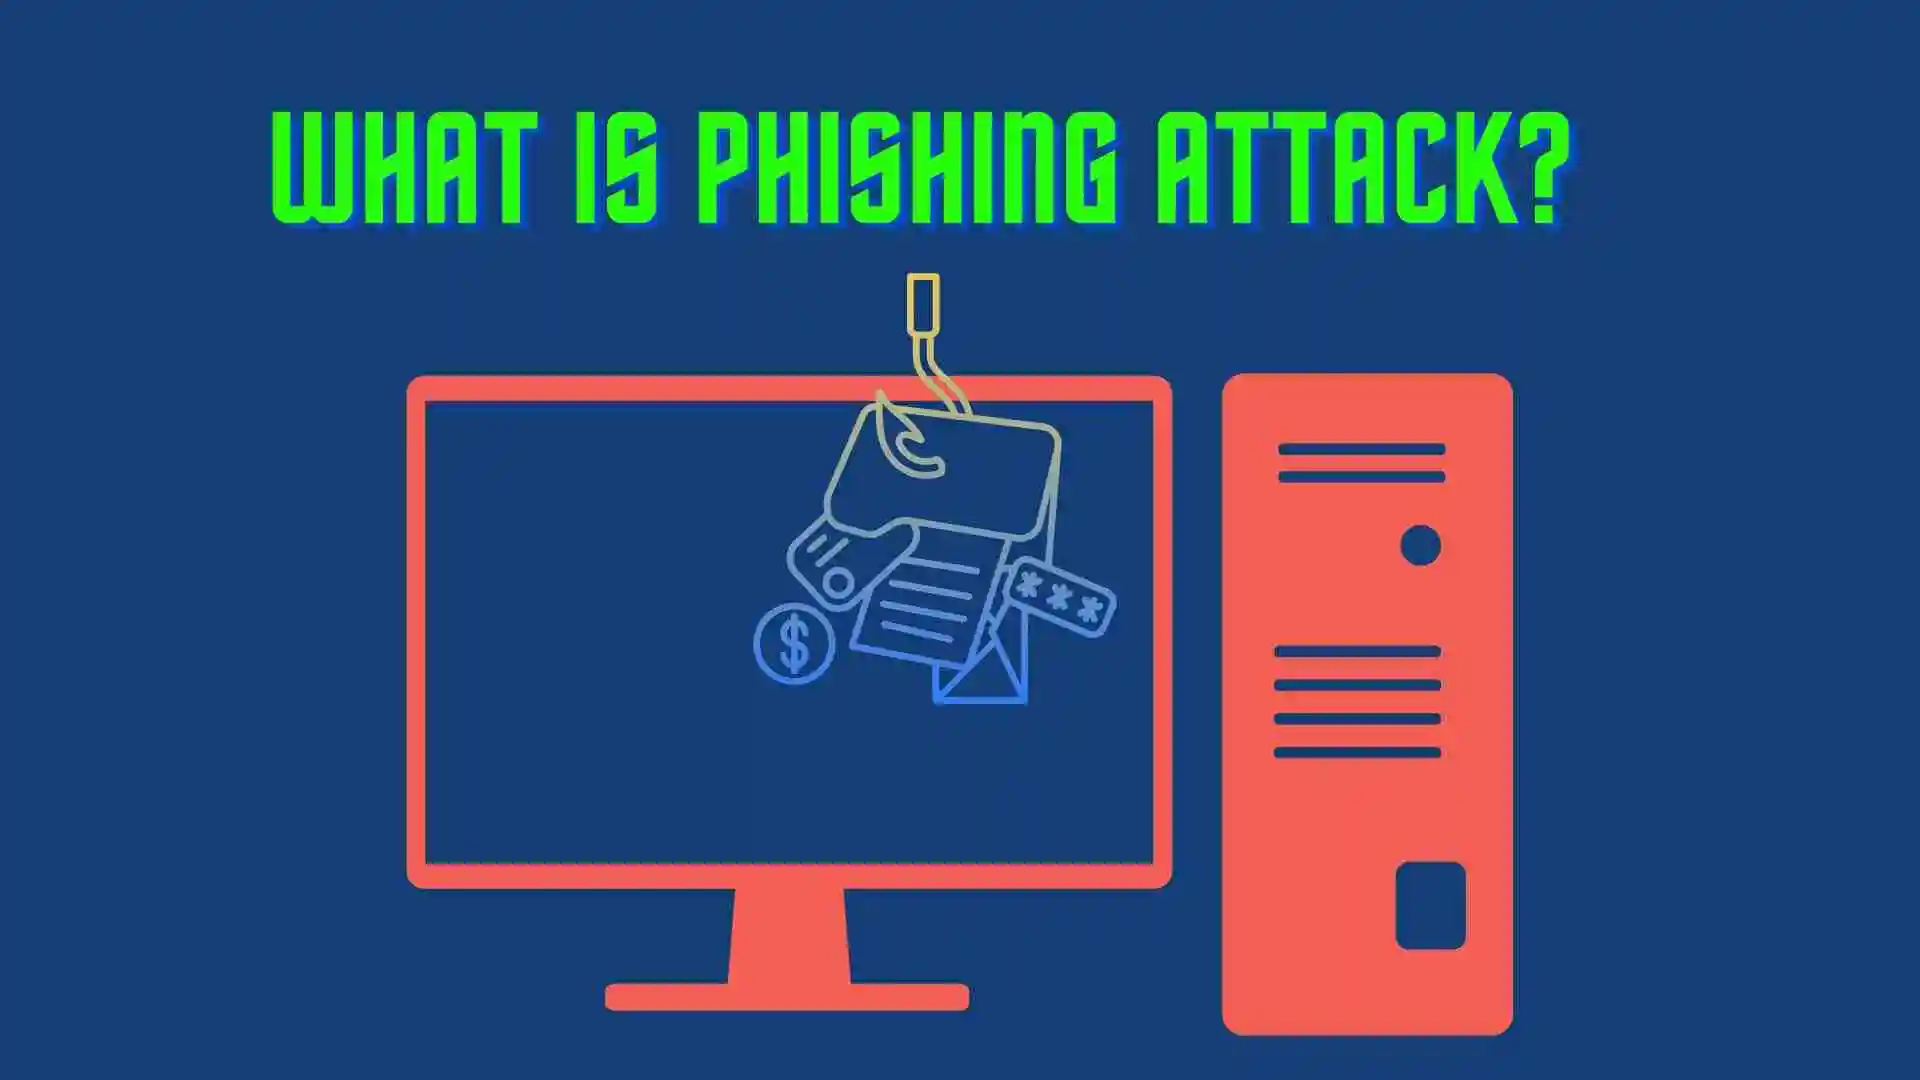 Phishing attacks involve the tracking of sensitive information, such as personal data, by masquerading as a trustworthy entity.